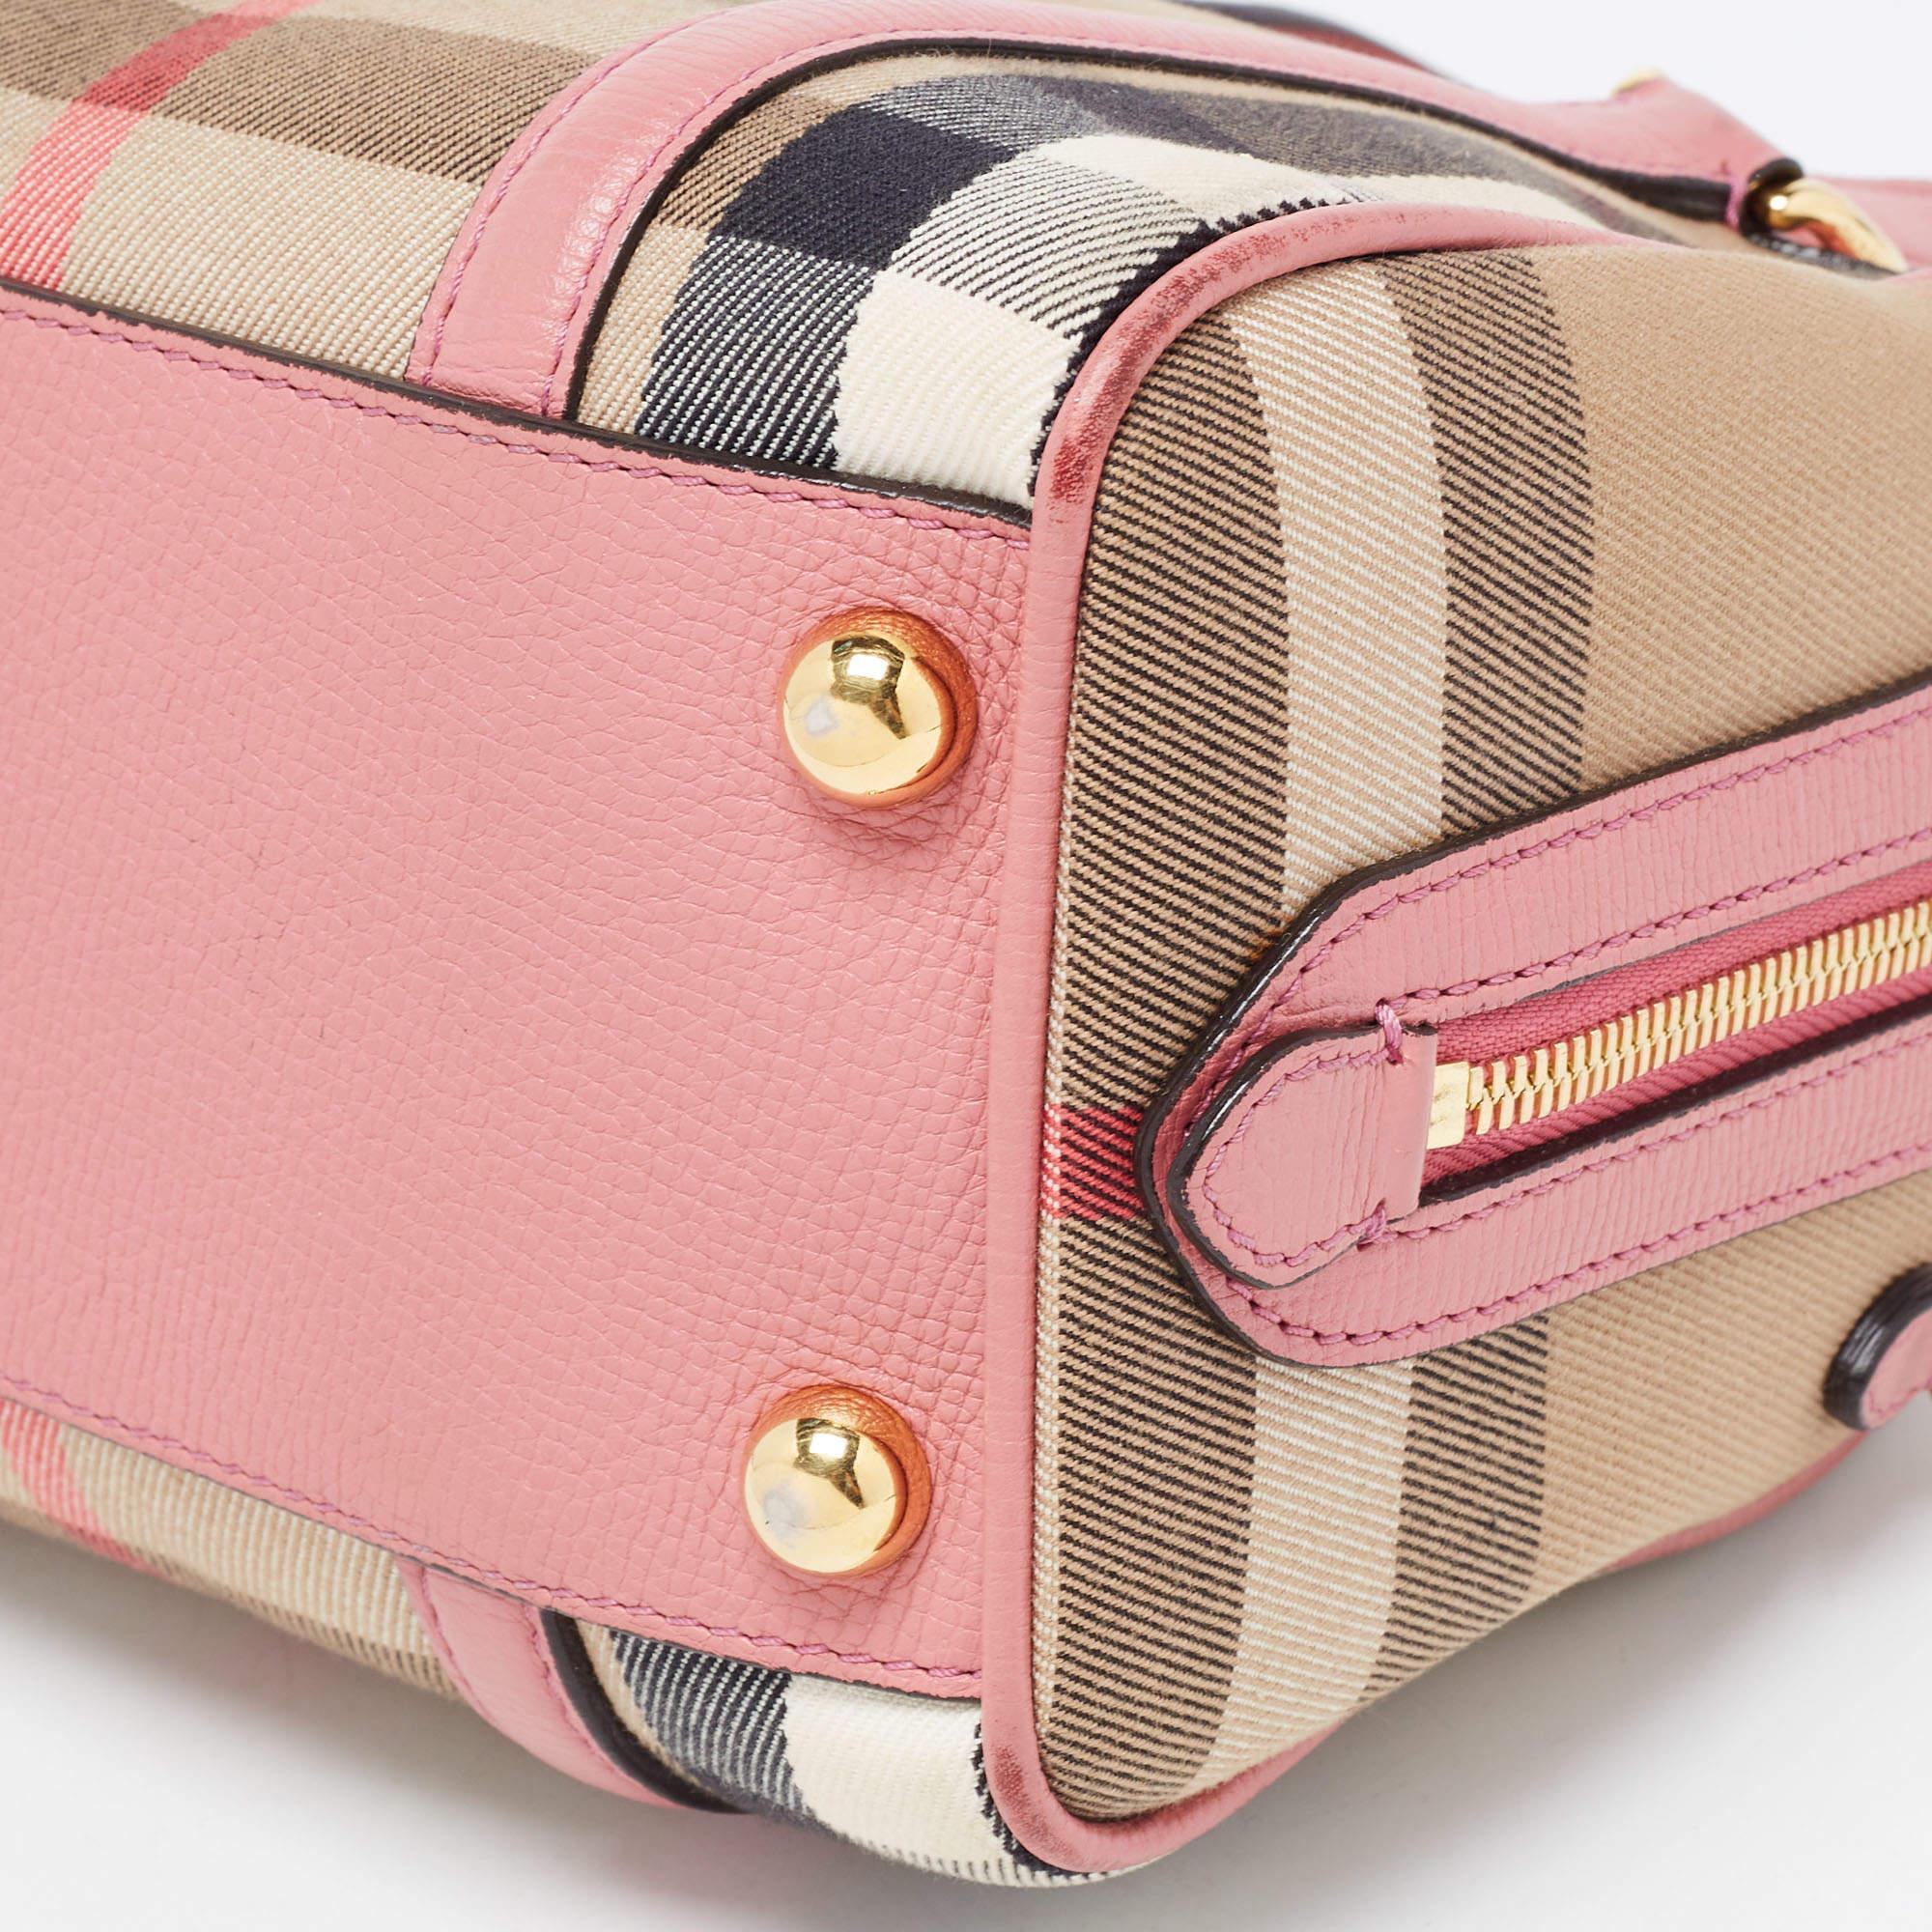 Burberry Pink/Beige Leather Small Alchester Bowler Bag 1